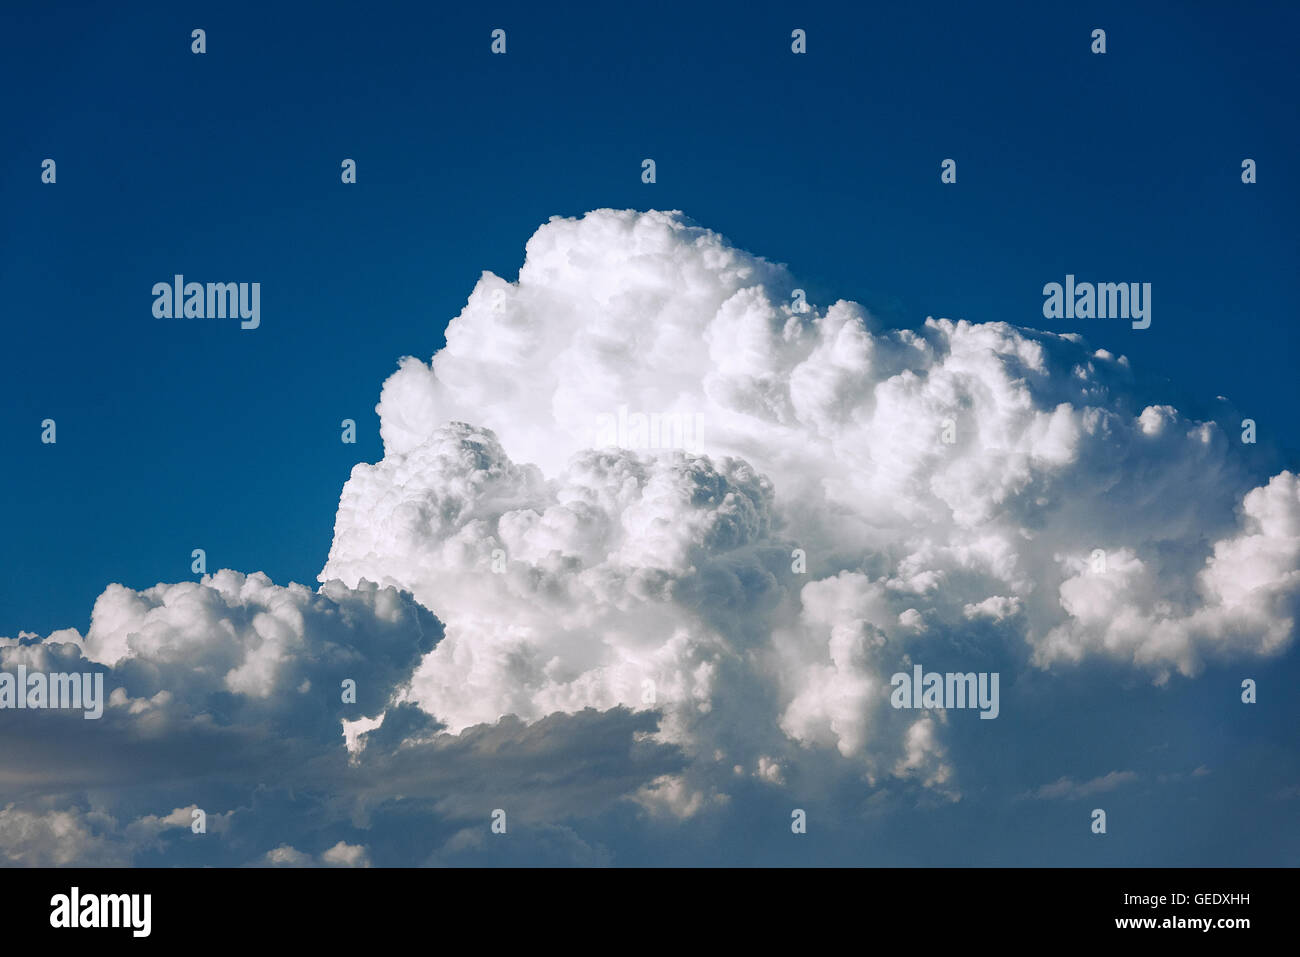 Cloud formation. Stock Photo